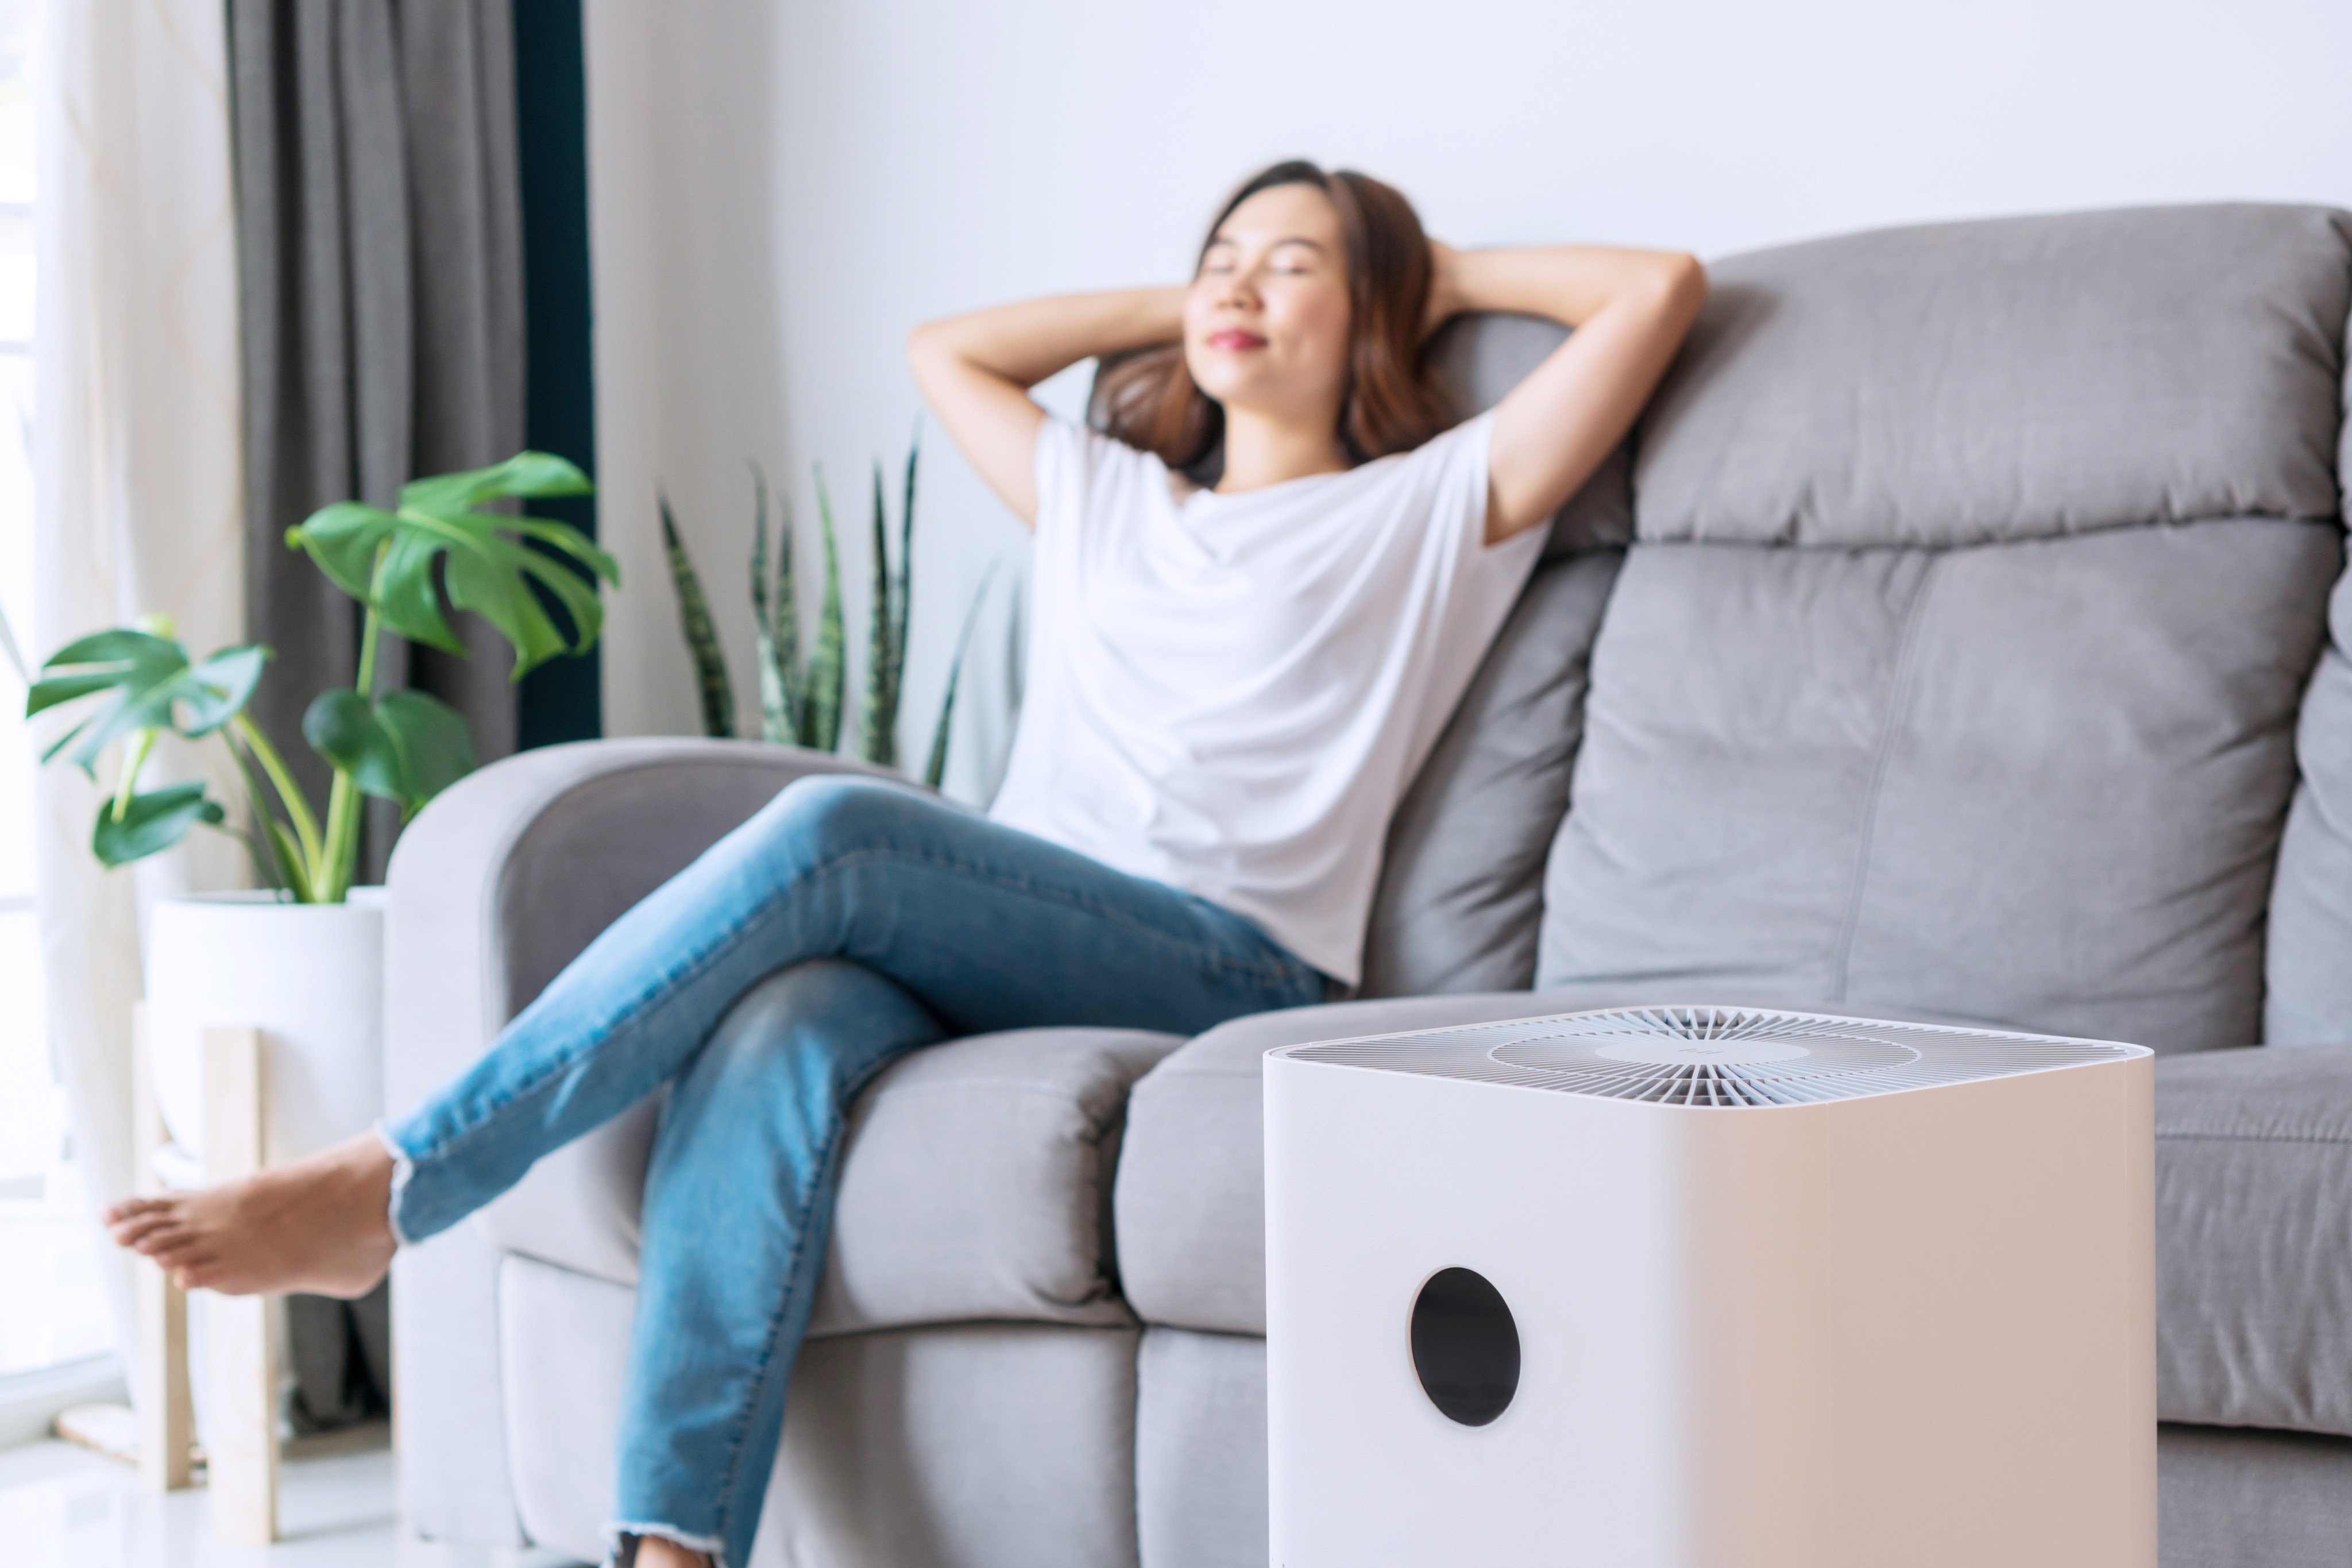 Consumer watchdog tests have found air purifier performance is not necessarily linked to price. Photo: Shutterstock